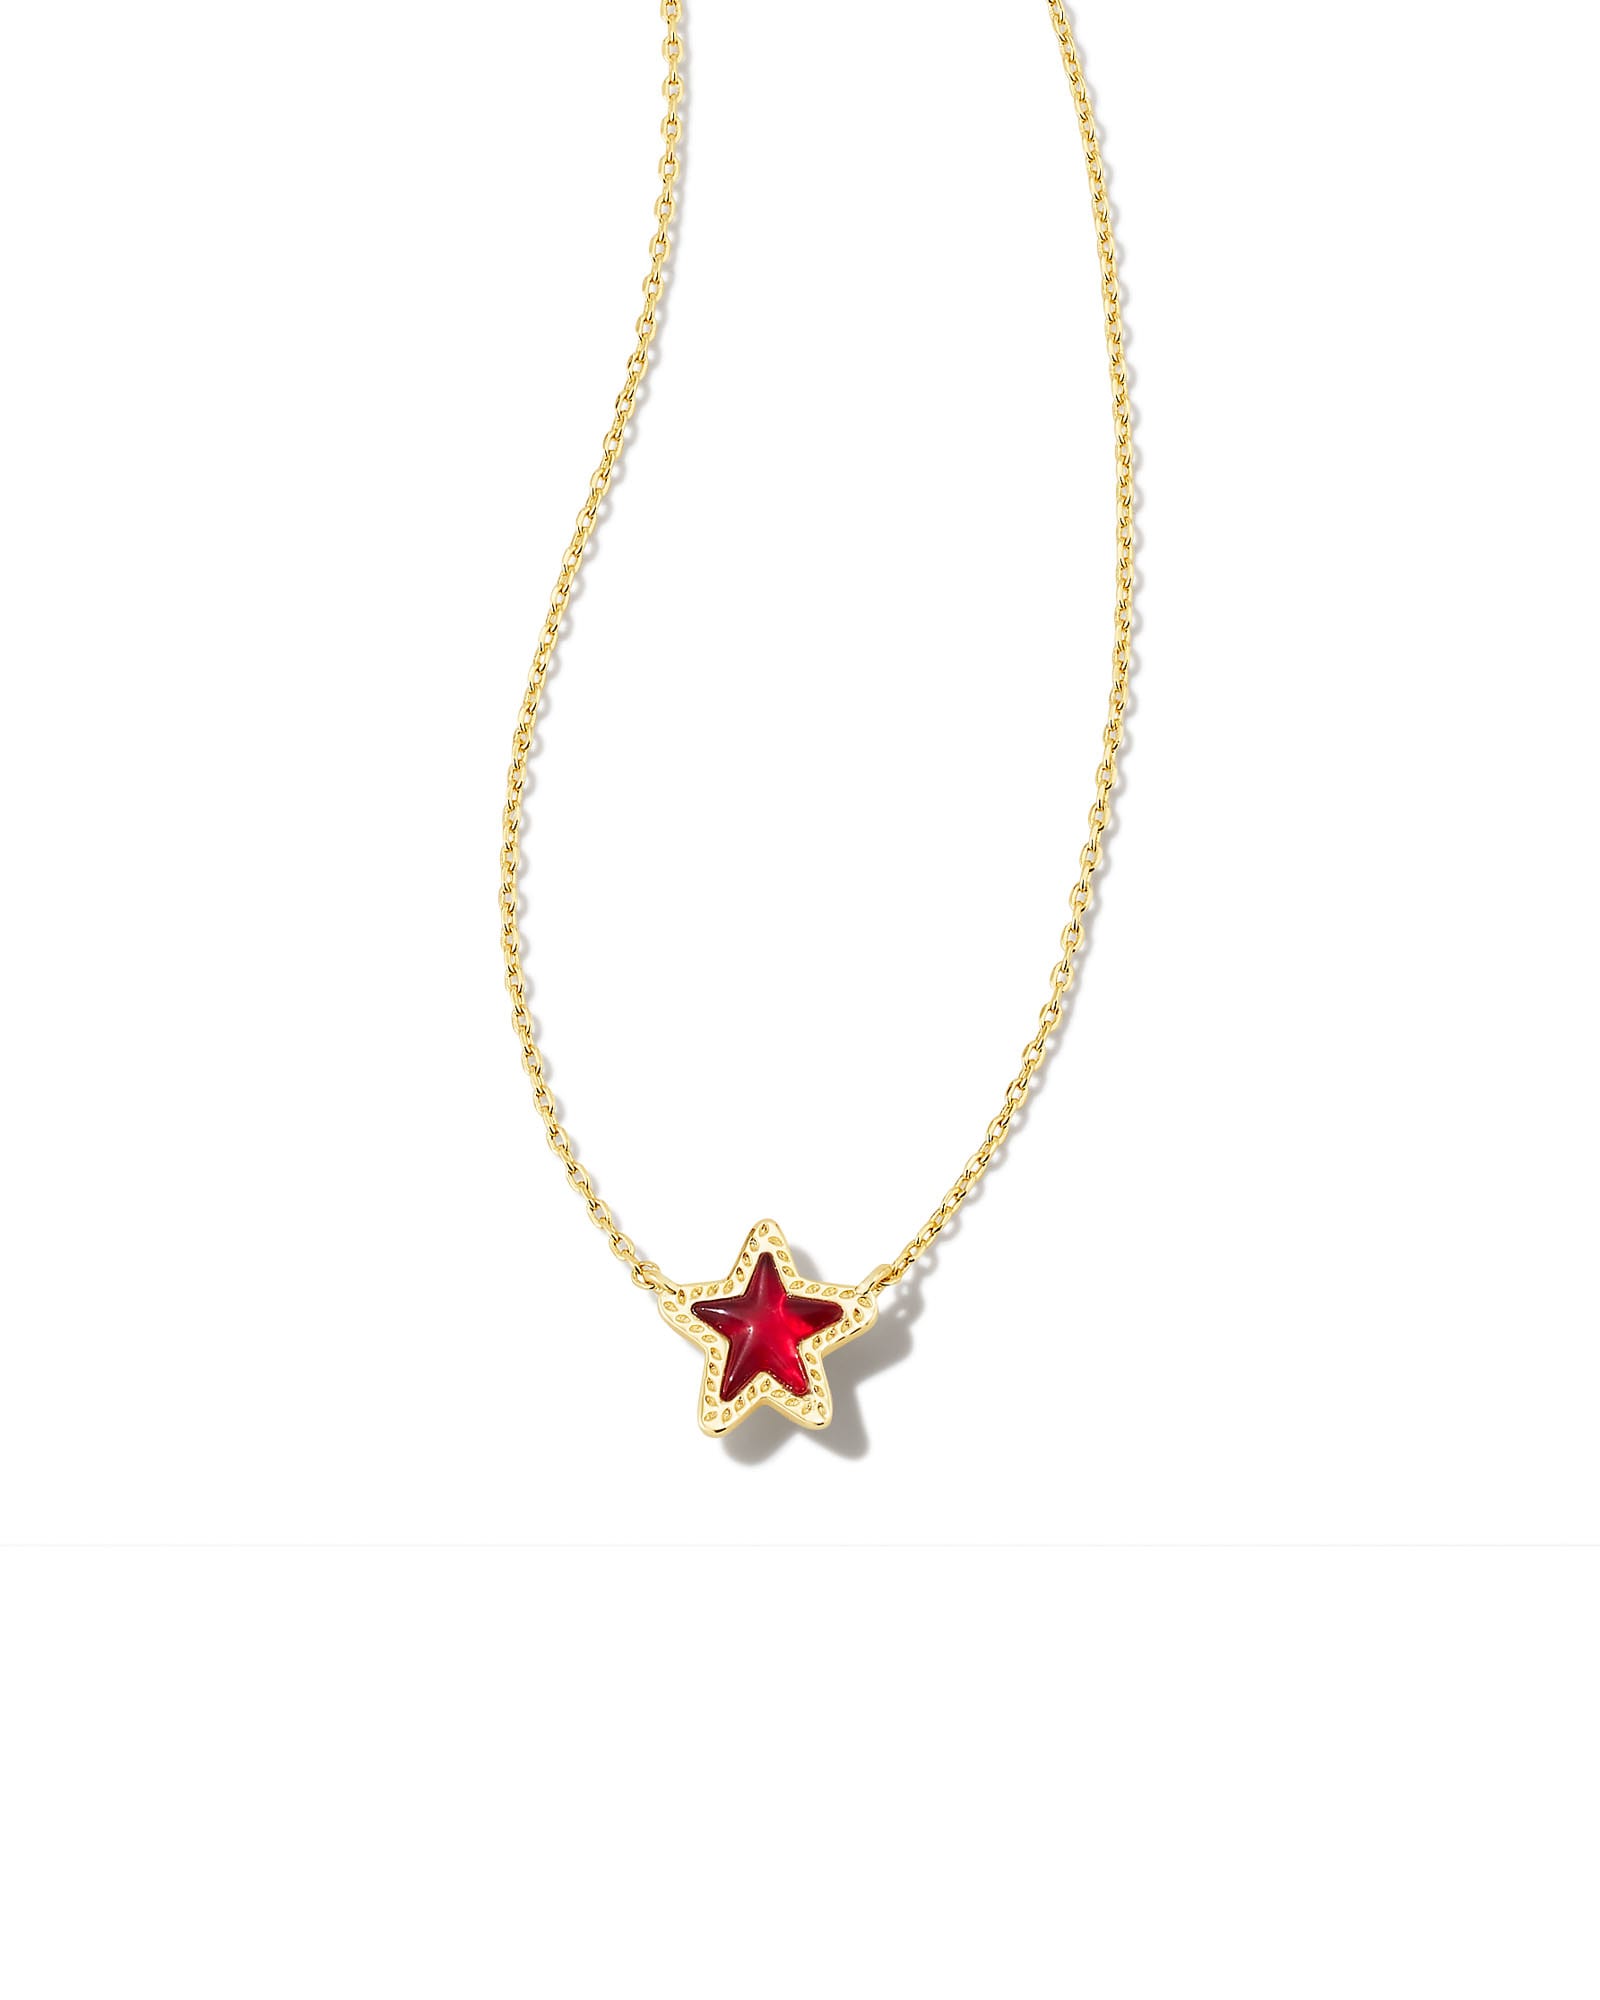 Kendra Scott Jae Gold Star Small Short Pendant Necklace in Cranberry Illusion | Glass/Mother Of Pearl/Metal